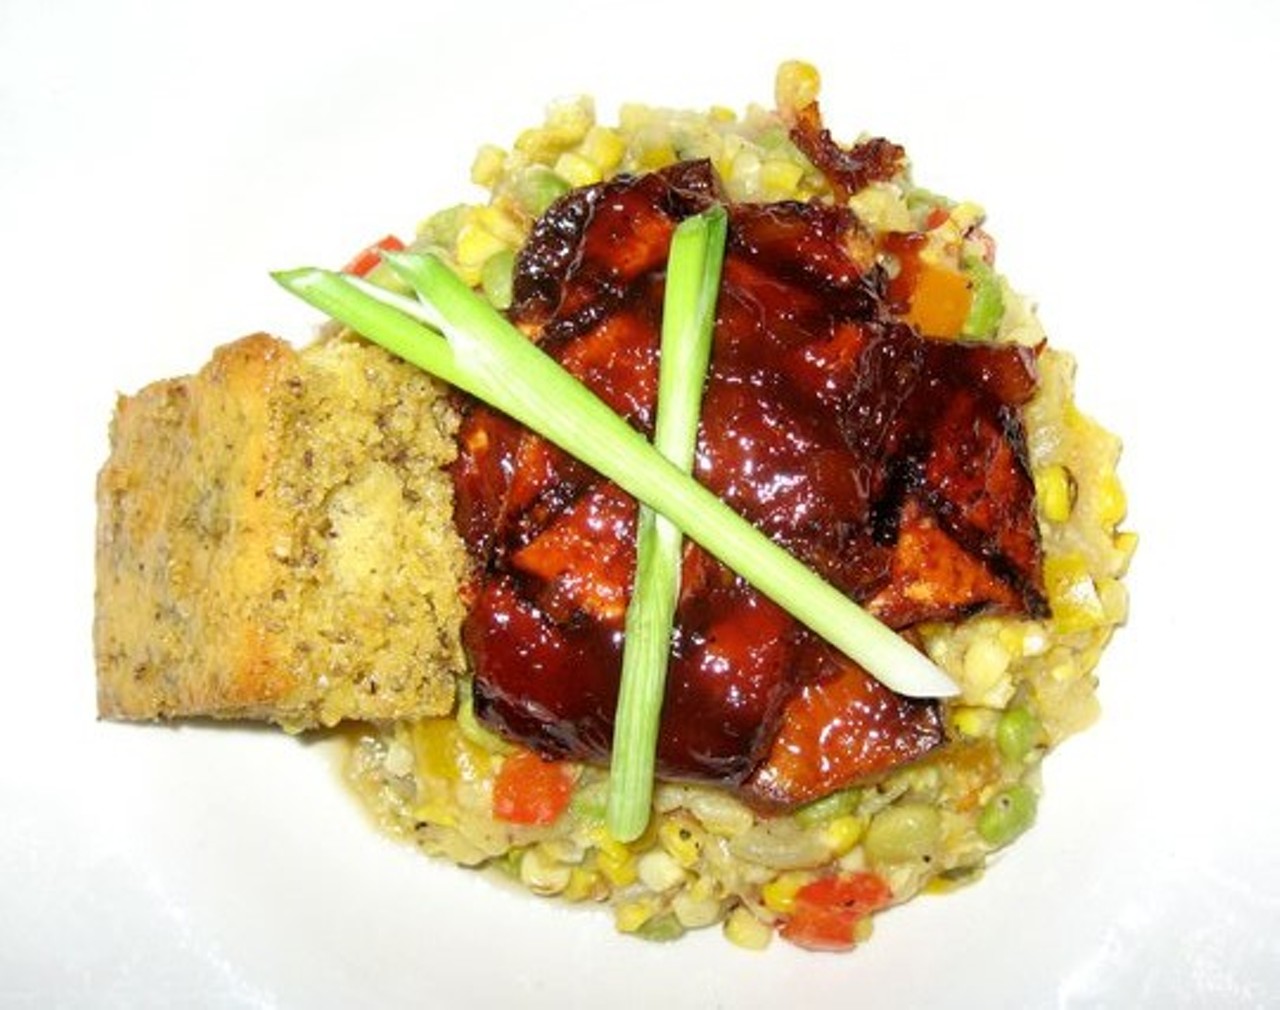 Bistro 185 makes an event out of Vegan eating. The restaurant offers a monthly Vegan night dinner with a prix fixe menu.